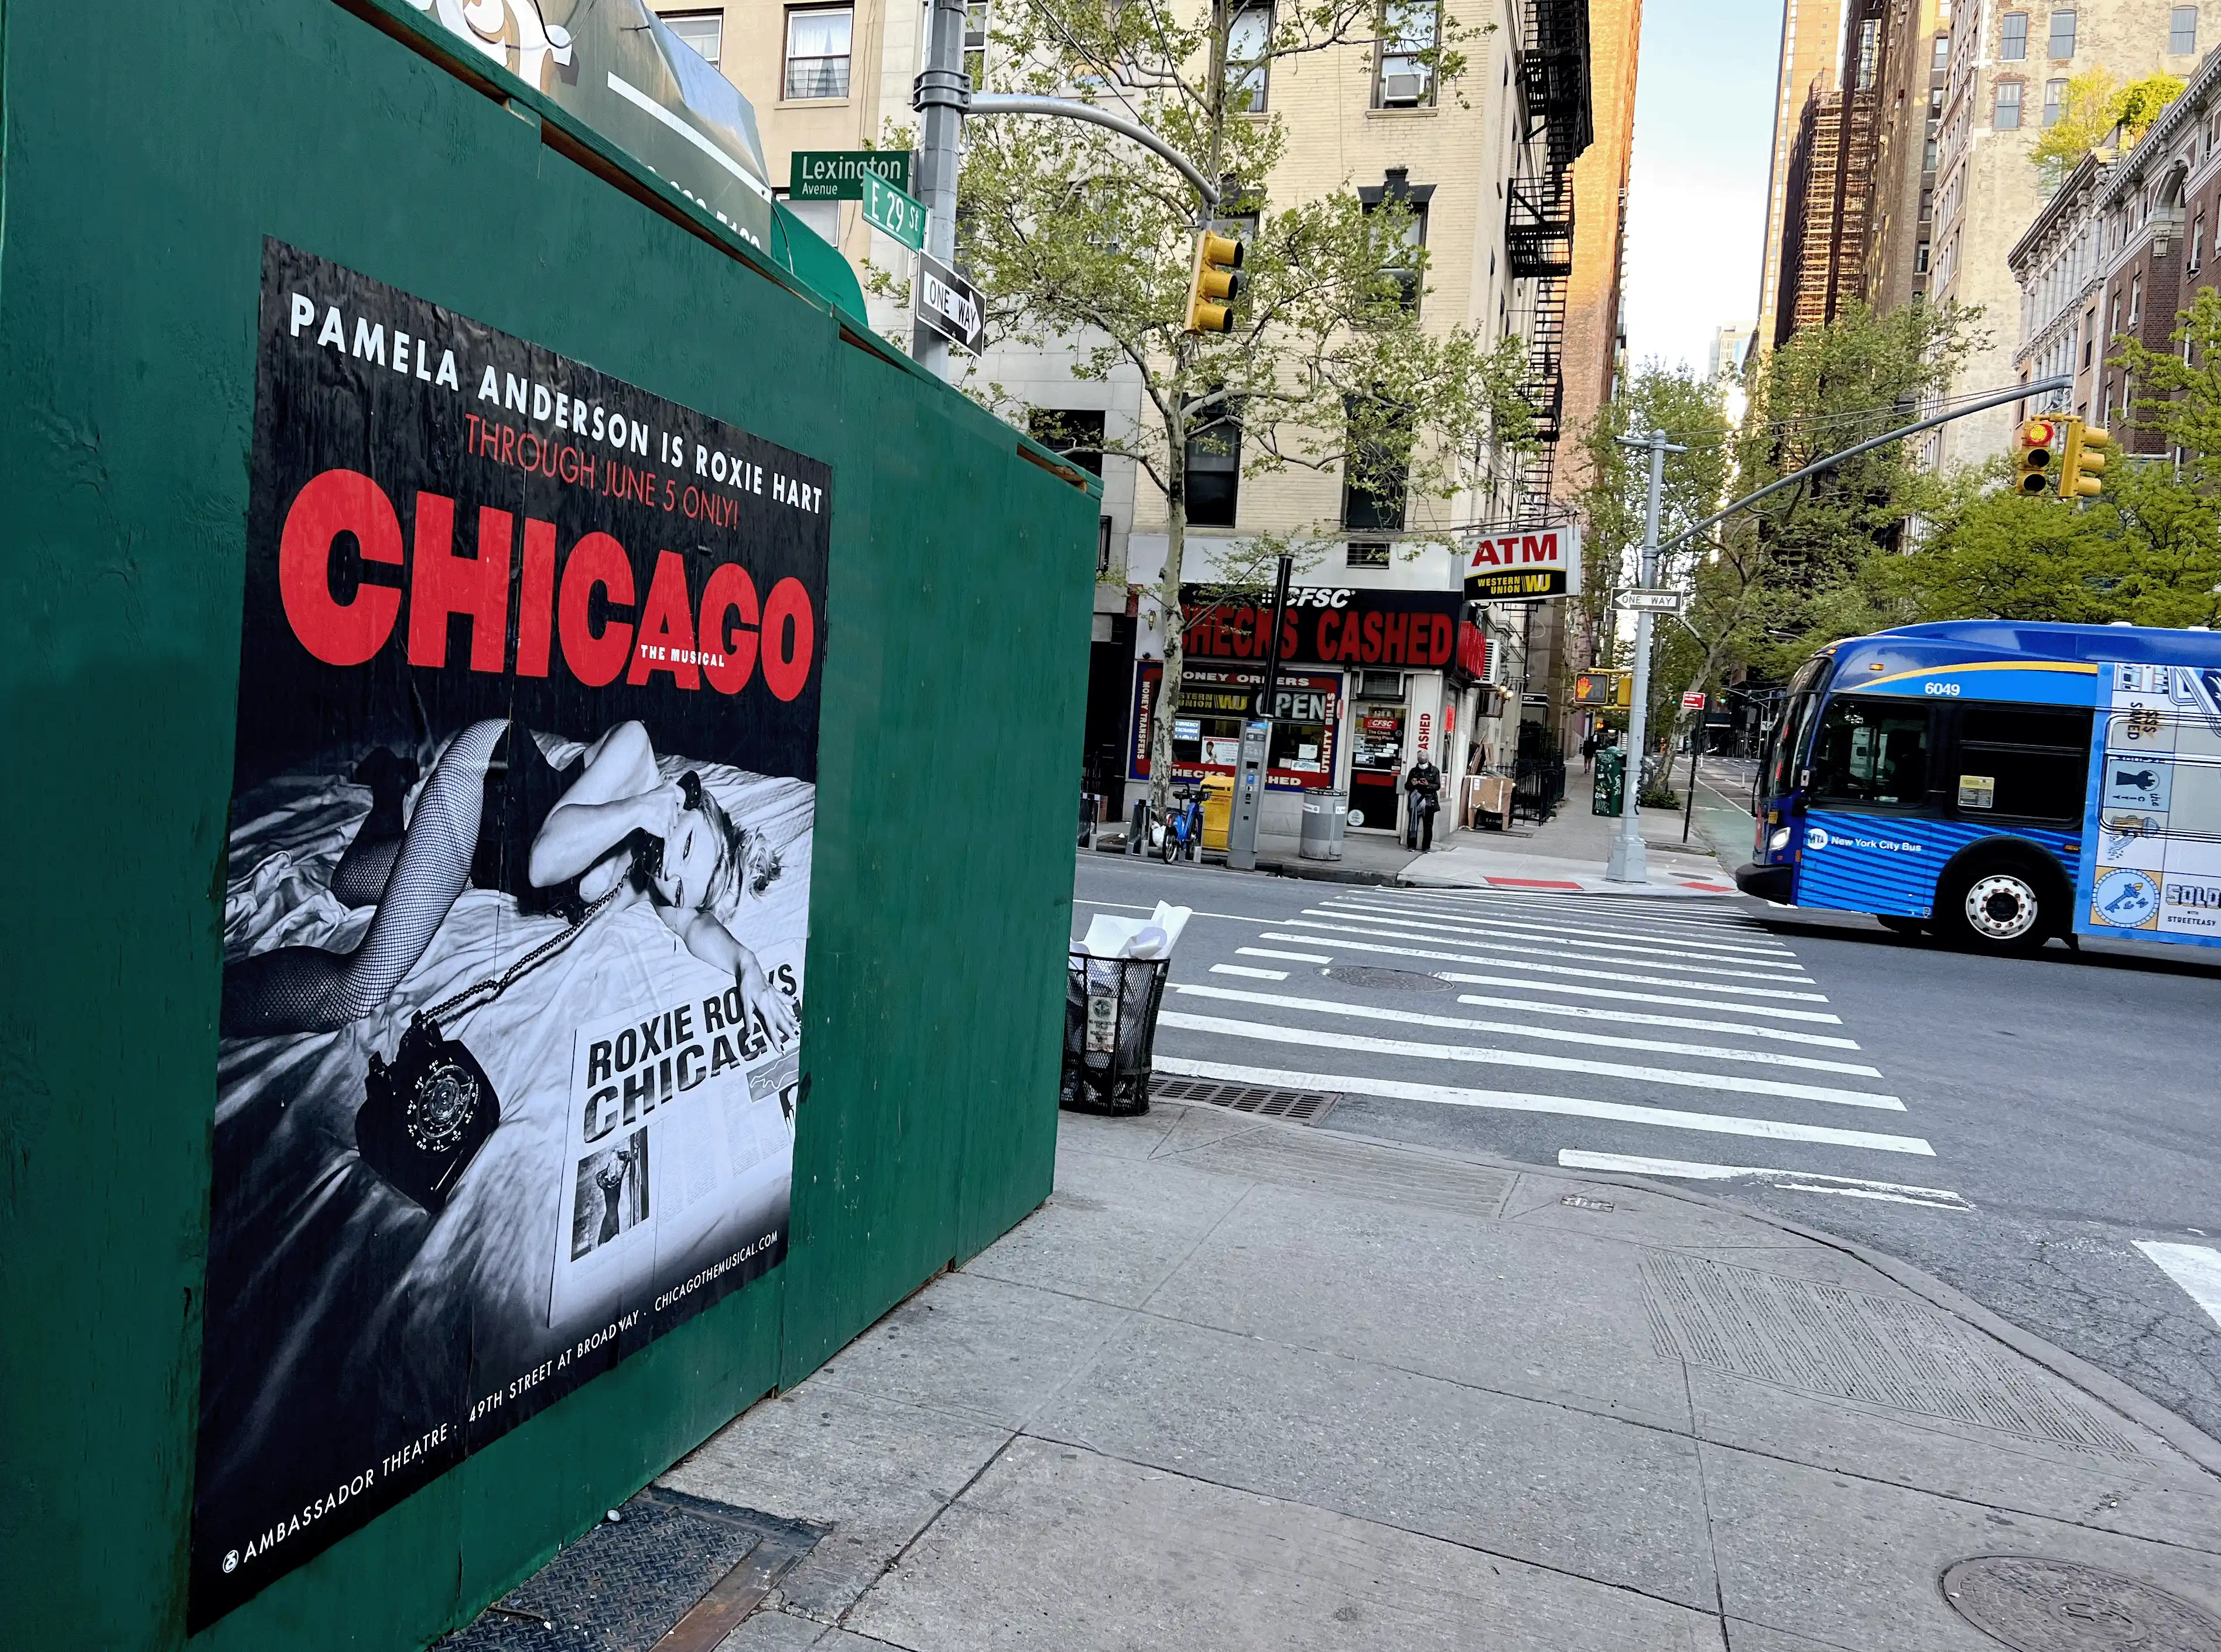 Wild posting advertisement of Broadway show Chicago on the corner of Lexington Ave and 29th street in Manhattan